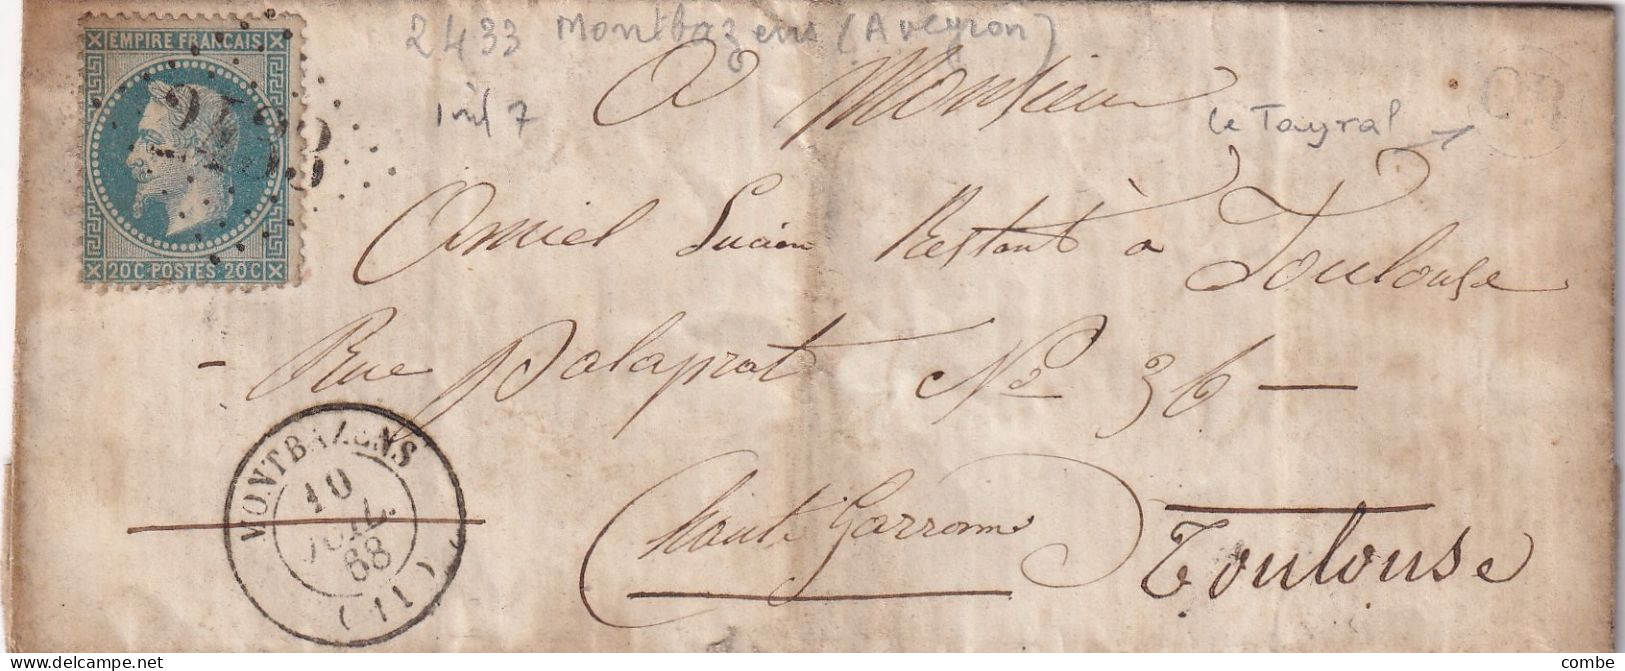 LETTRE. 10 JUIL 68. N° 29. MONTBAZENS. AVEYRON. GC 2433 . ORIGINE RURALE OR = LE TAYRAL POUR TOULOUSE - 1849-1876: Classic Period